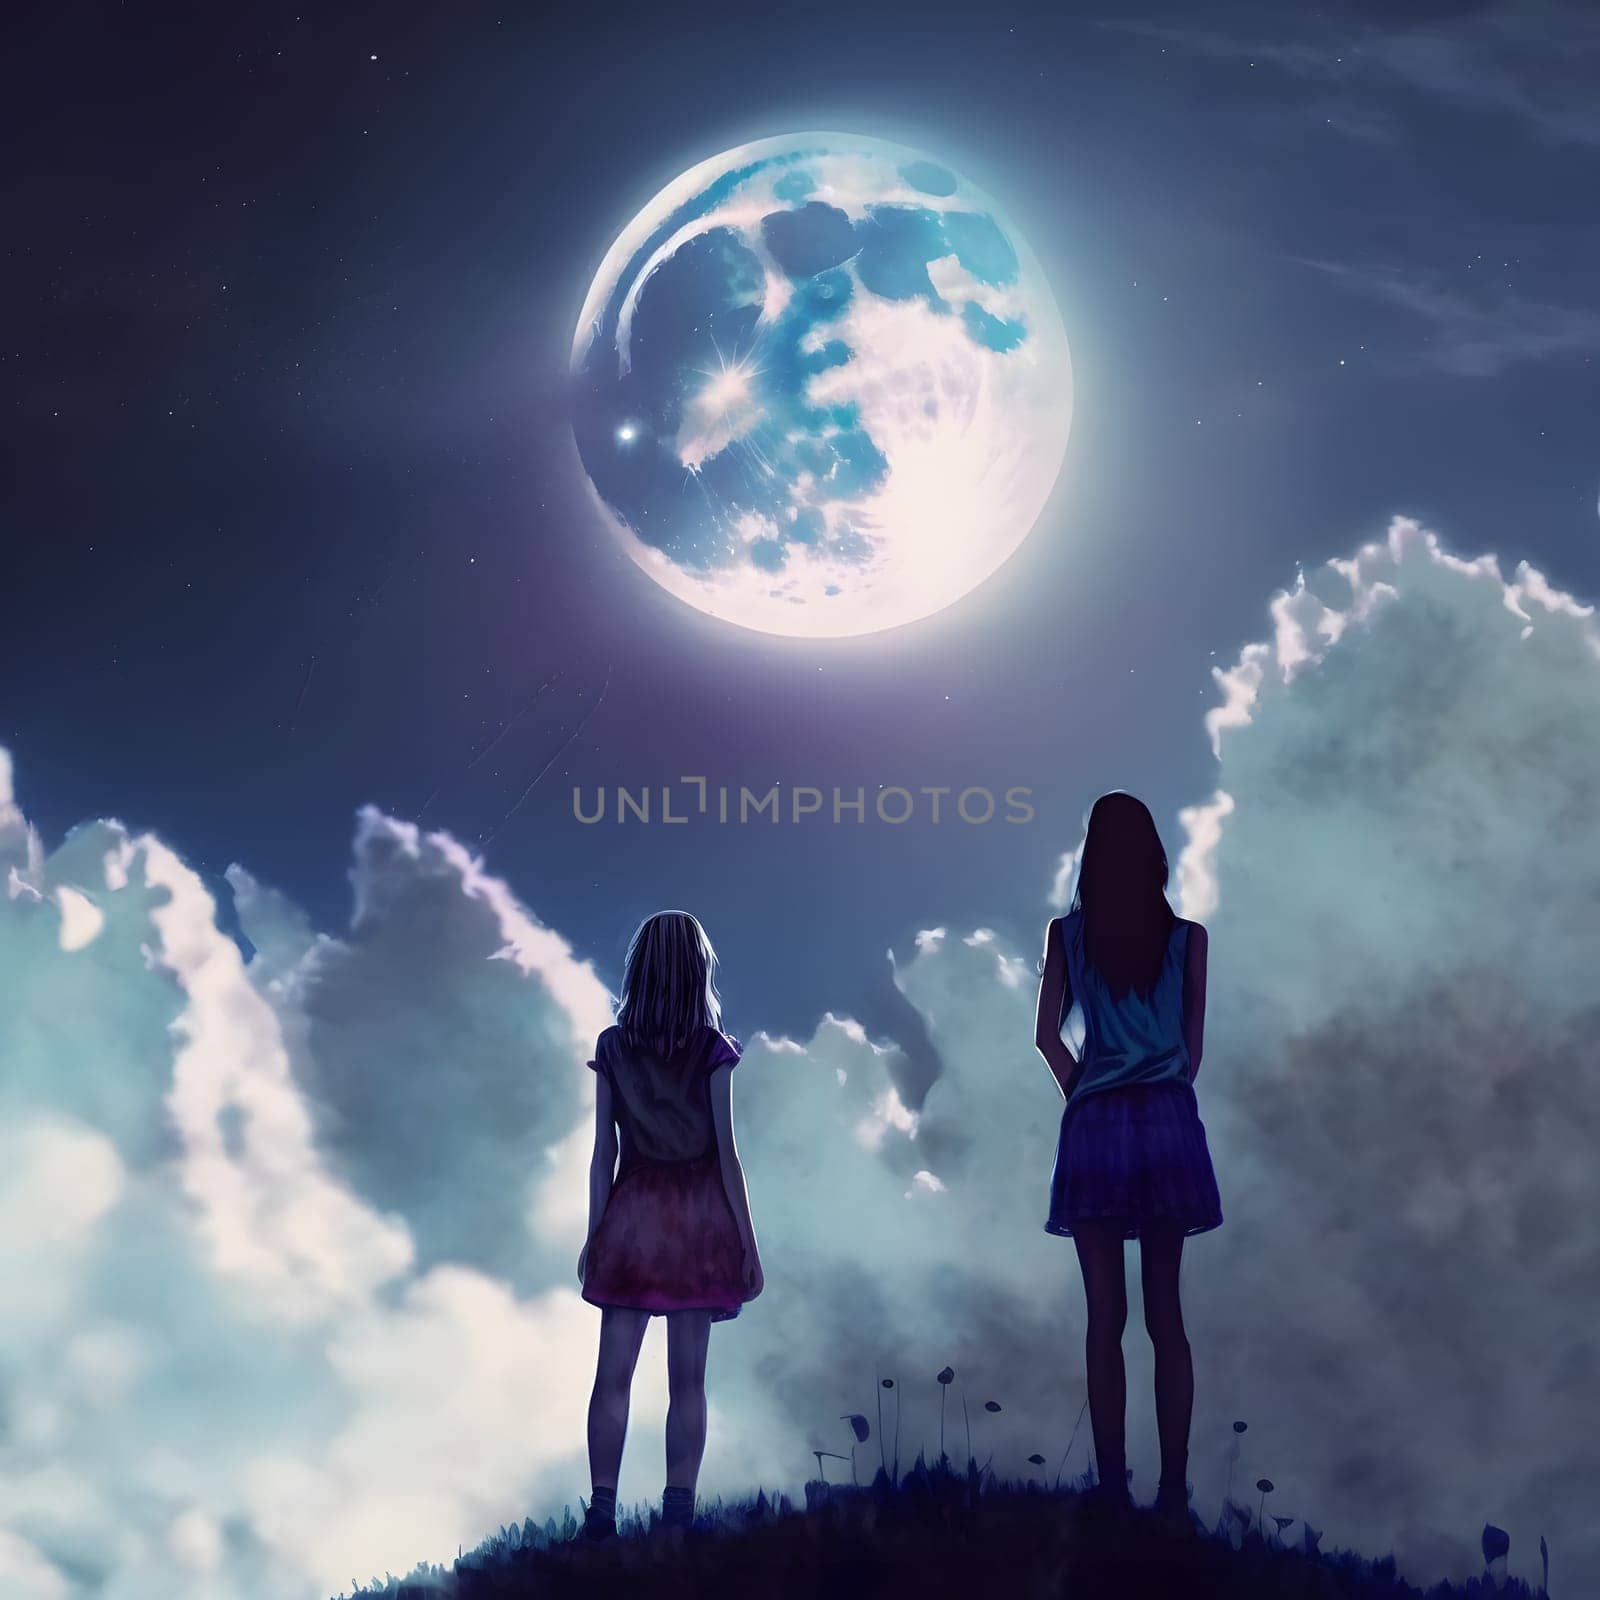 two girls looking up at the Moon in night sky, rear view, neural network generated art. Digitally generated image. Not based on any actual scene or pattern.